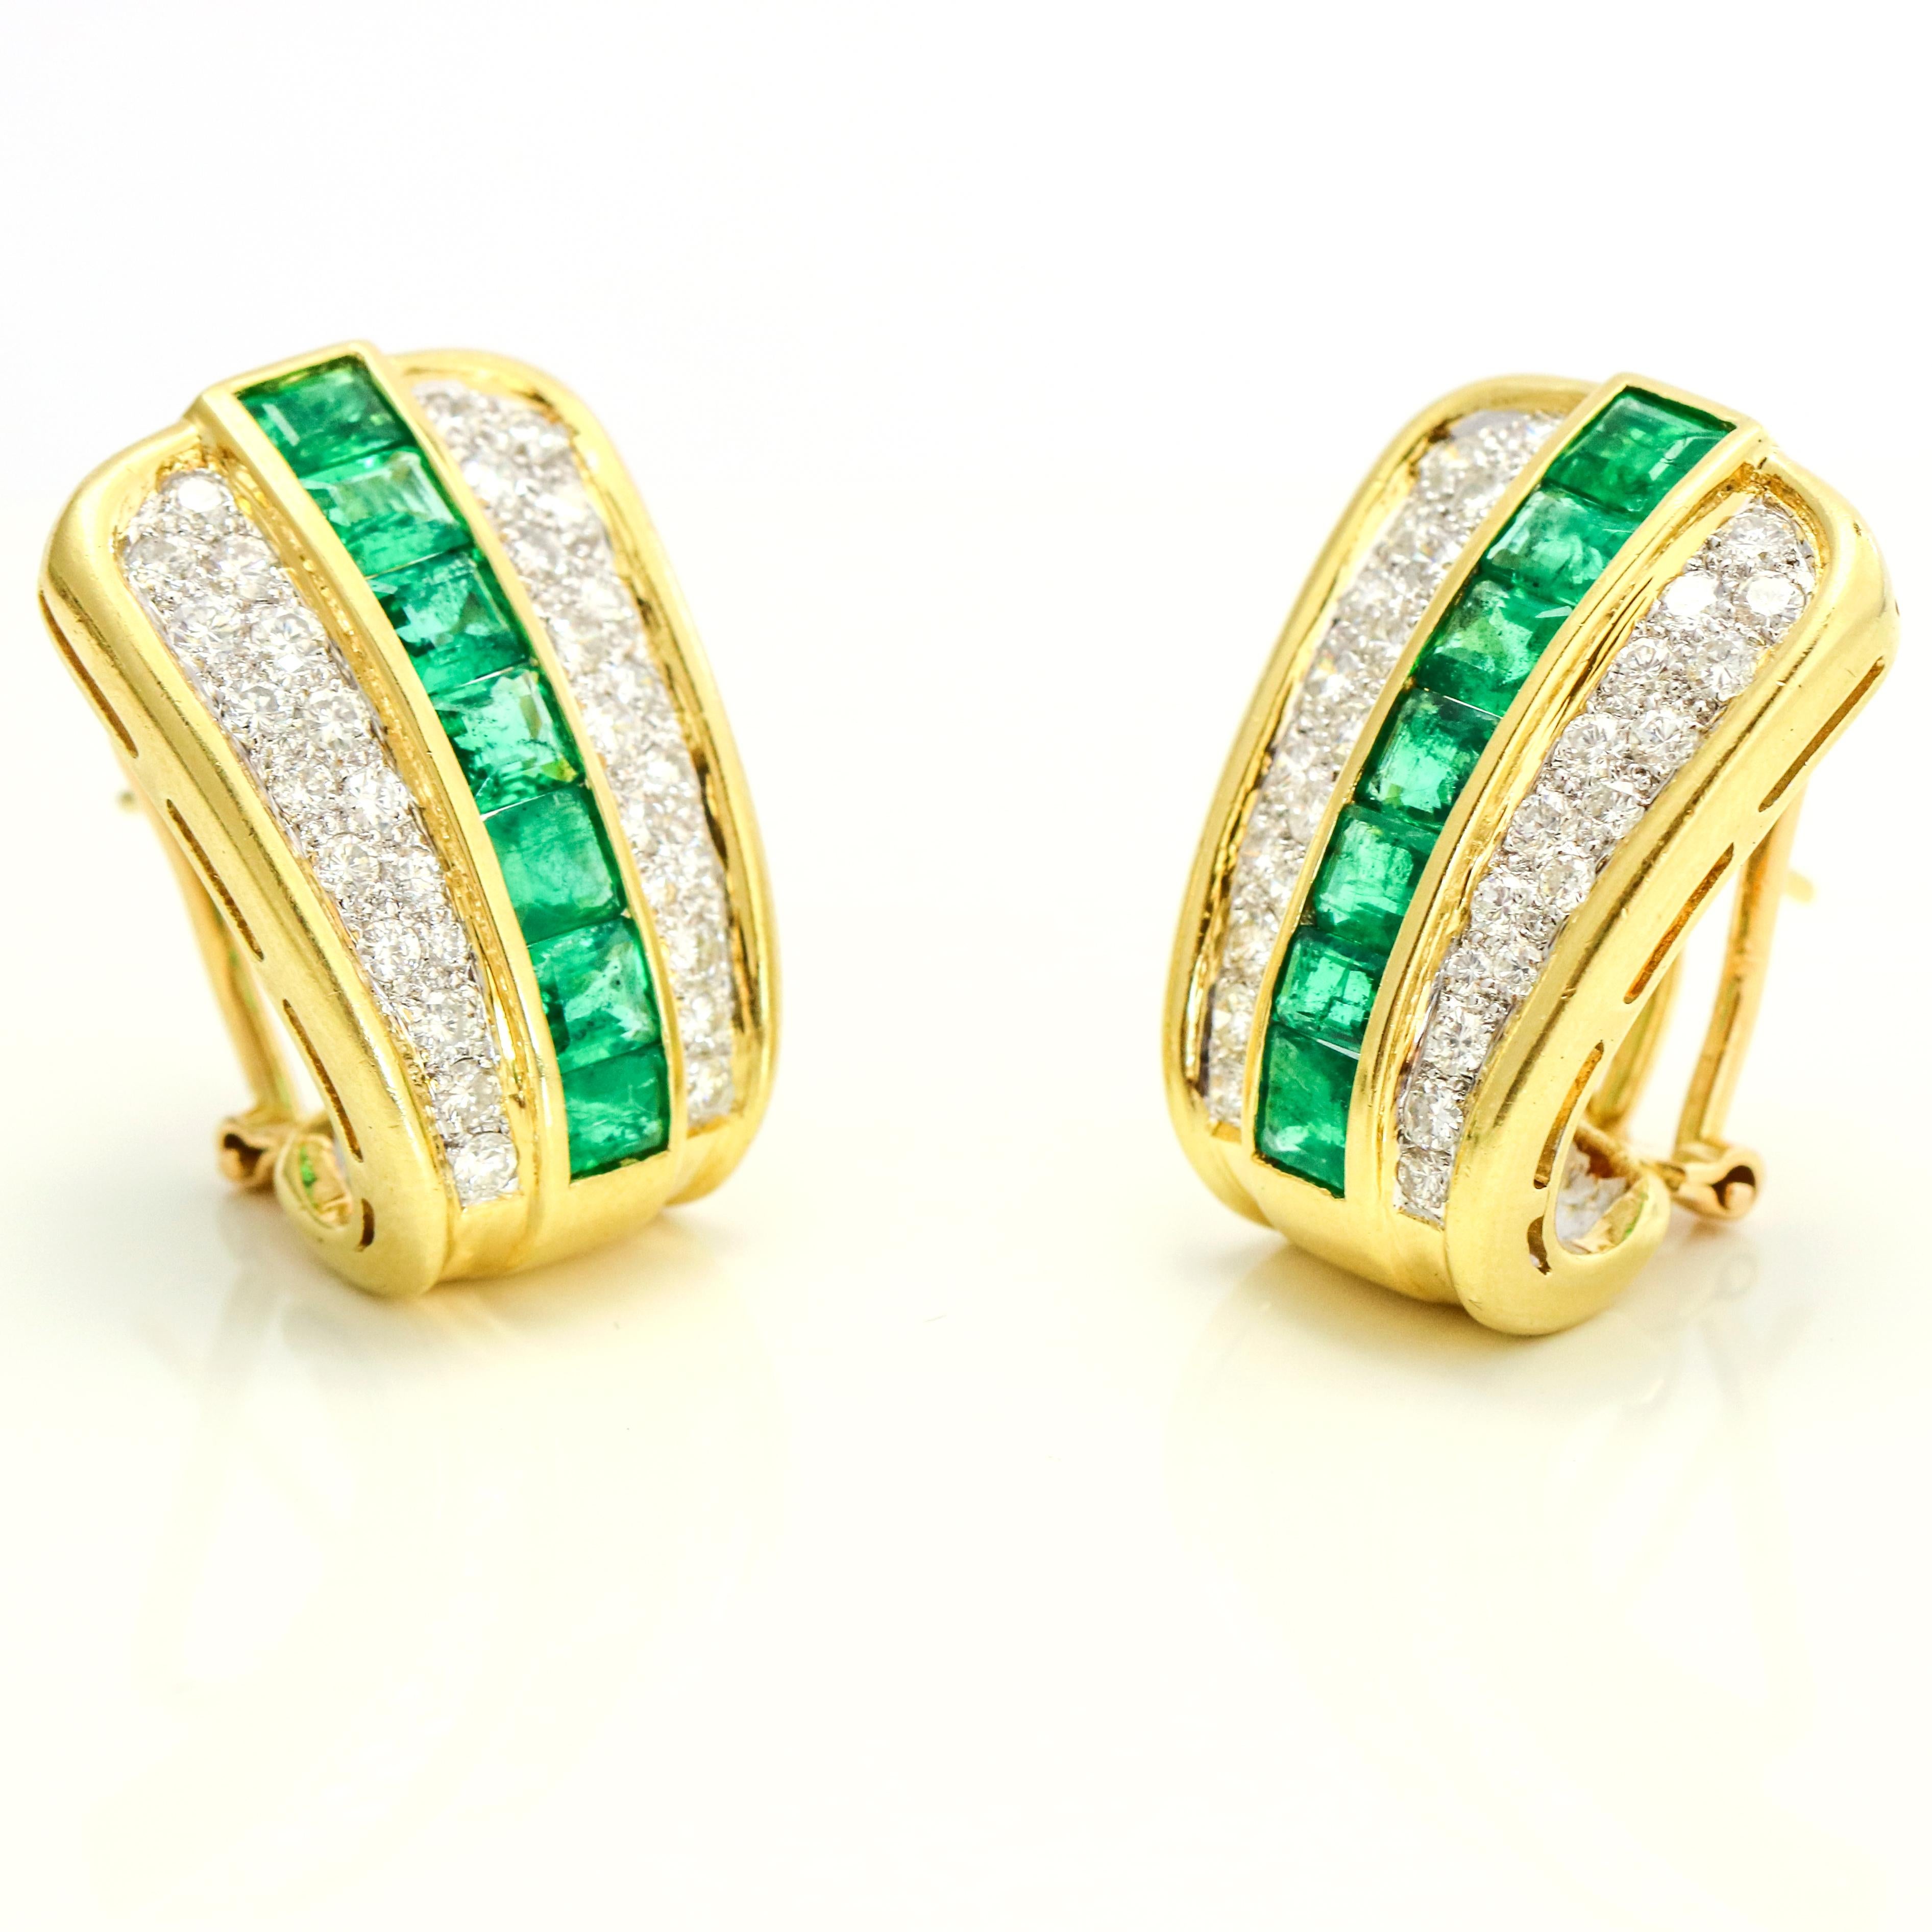 Retro shield earrings in 18-karat yellow gold with natural emeralds and diamonds. The earrings are prong set with 64 round diamonds, and 14 channel-set step cut emeralds. Omega backs.

Diamond Total Carat Weight, 1.50 carats